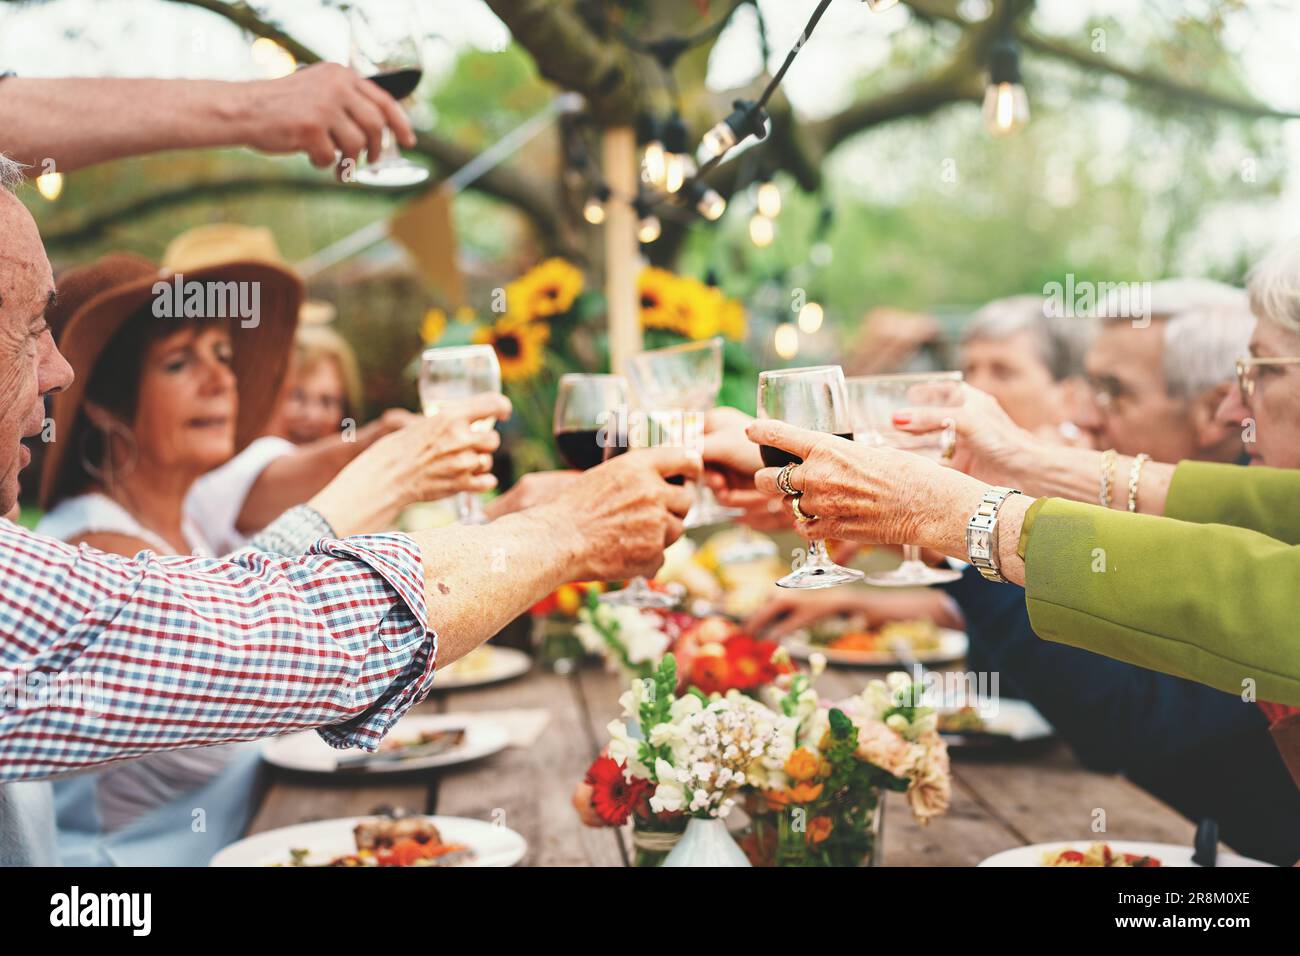 At a country garden gathering, a group of senior friends raise their glasses in a cheerful toast, with focus on their hands and glasses. Stock Photo